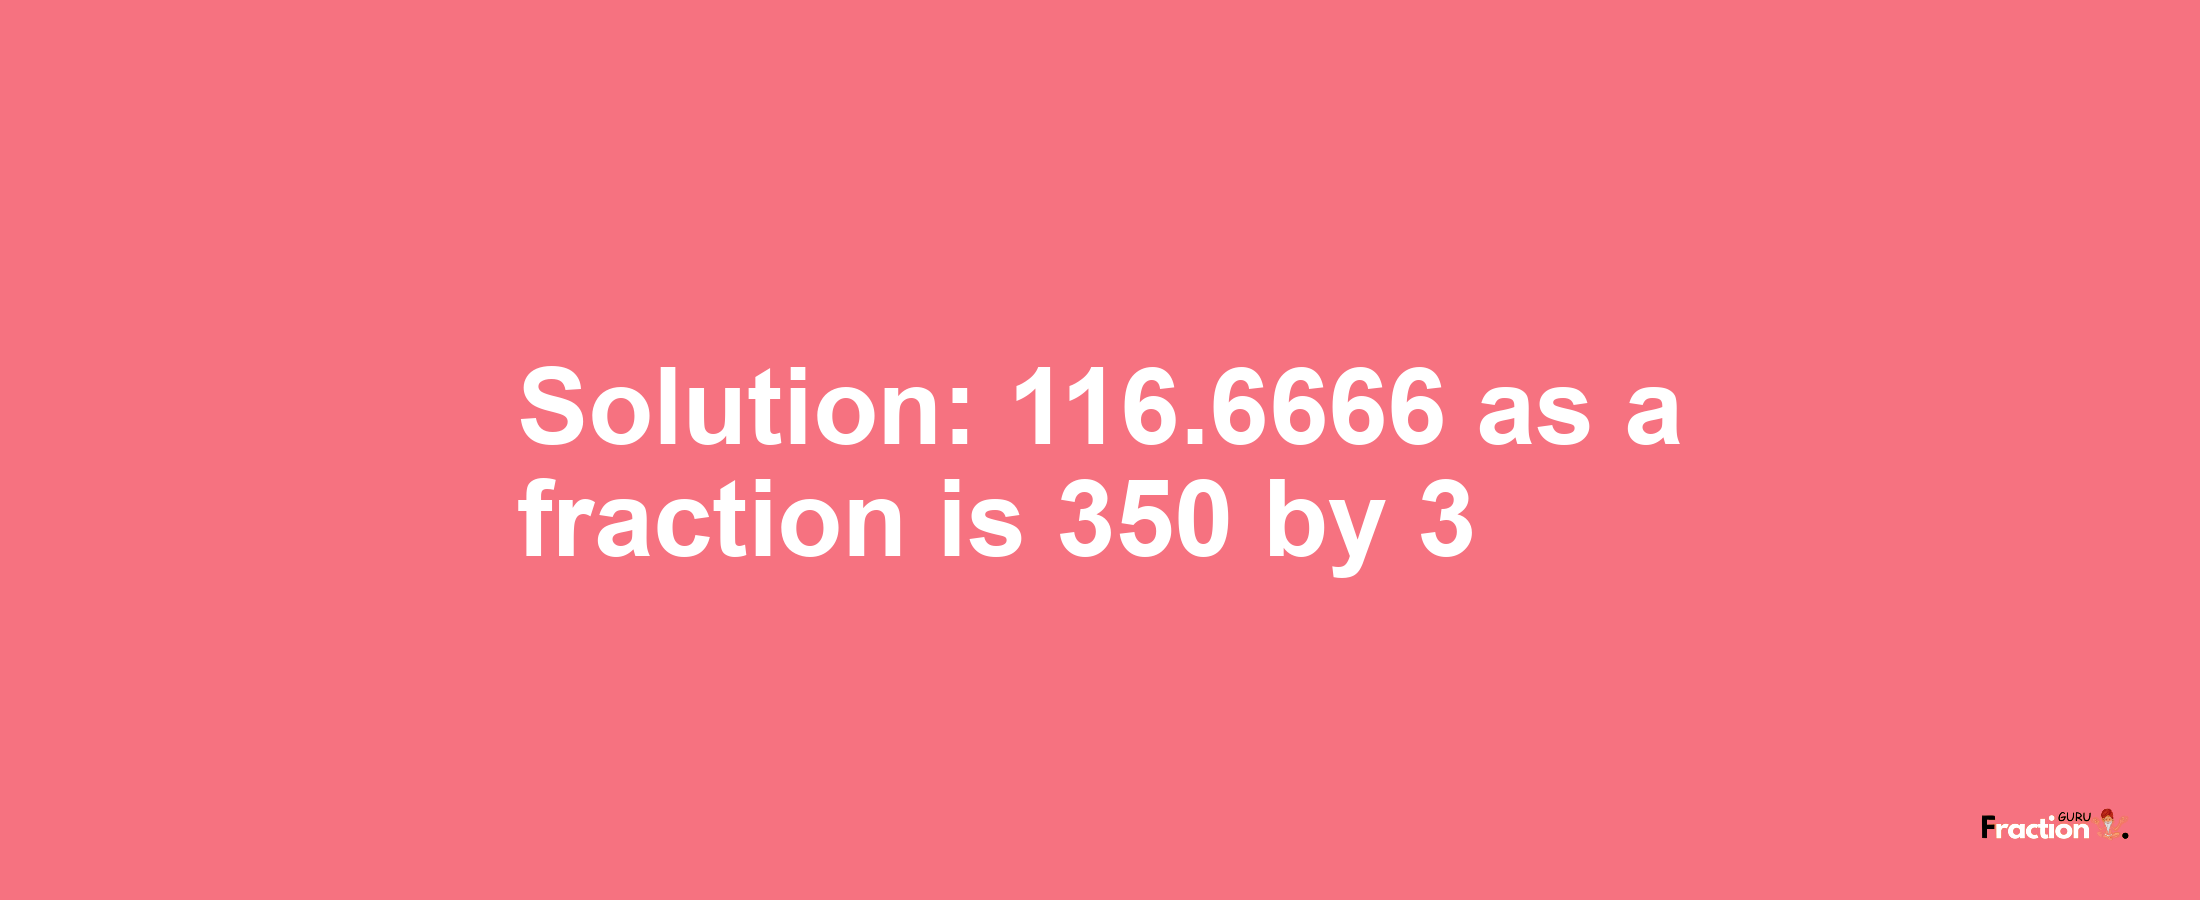 Solution:116.6666 as a fraction is 350/3